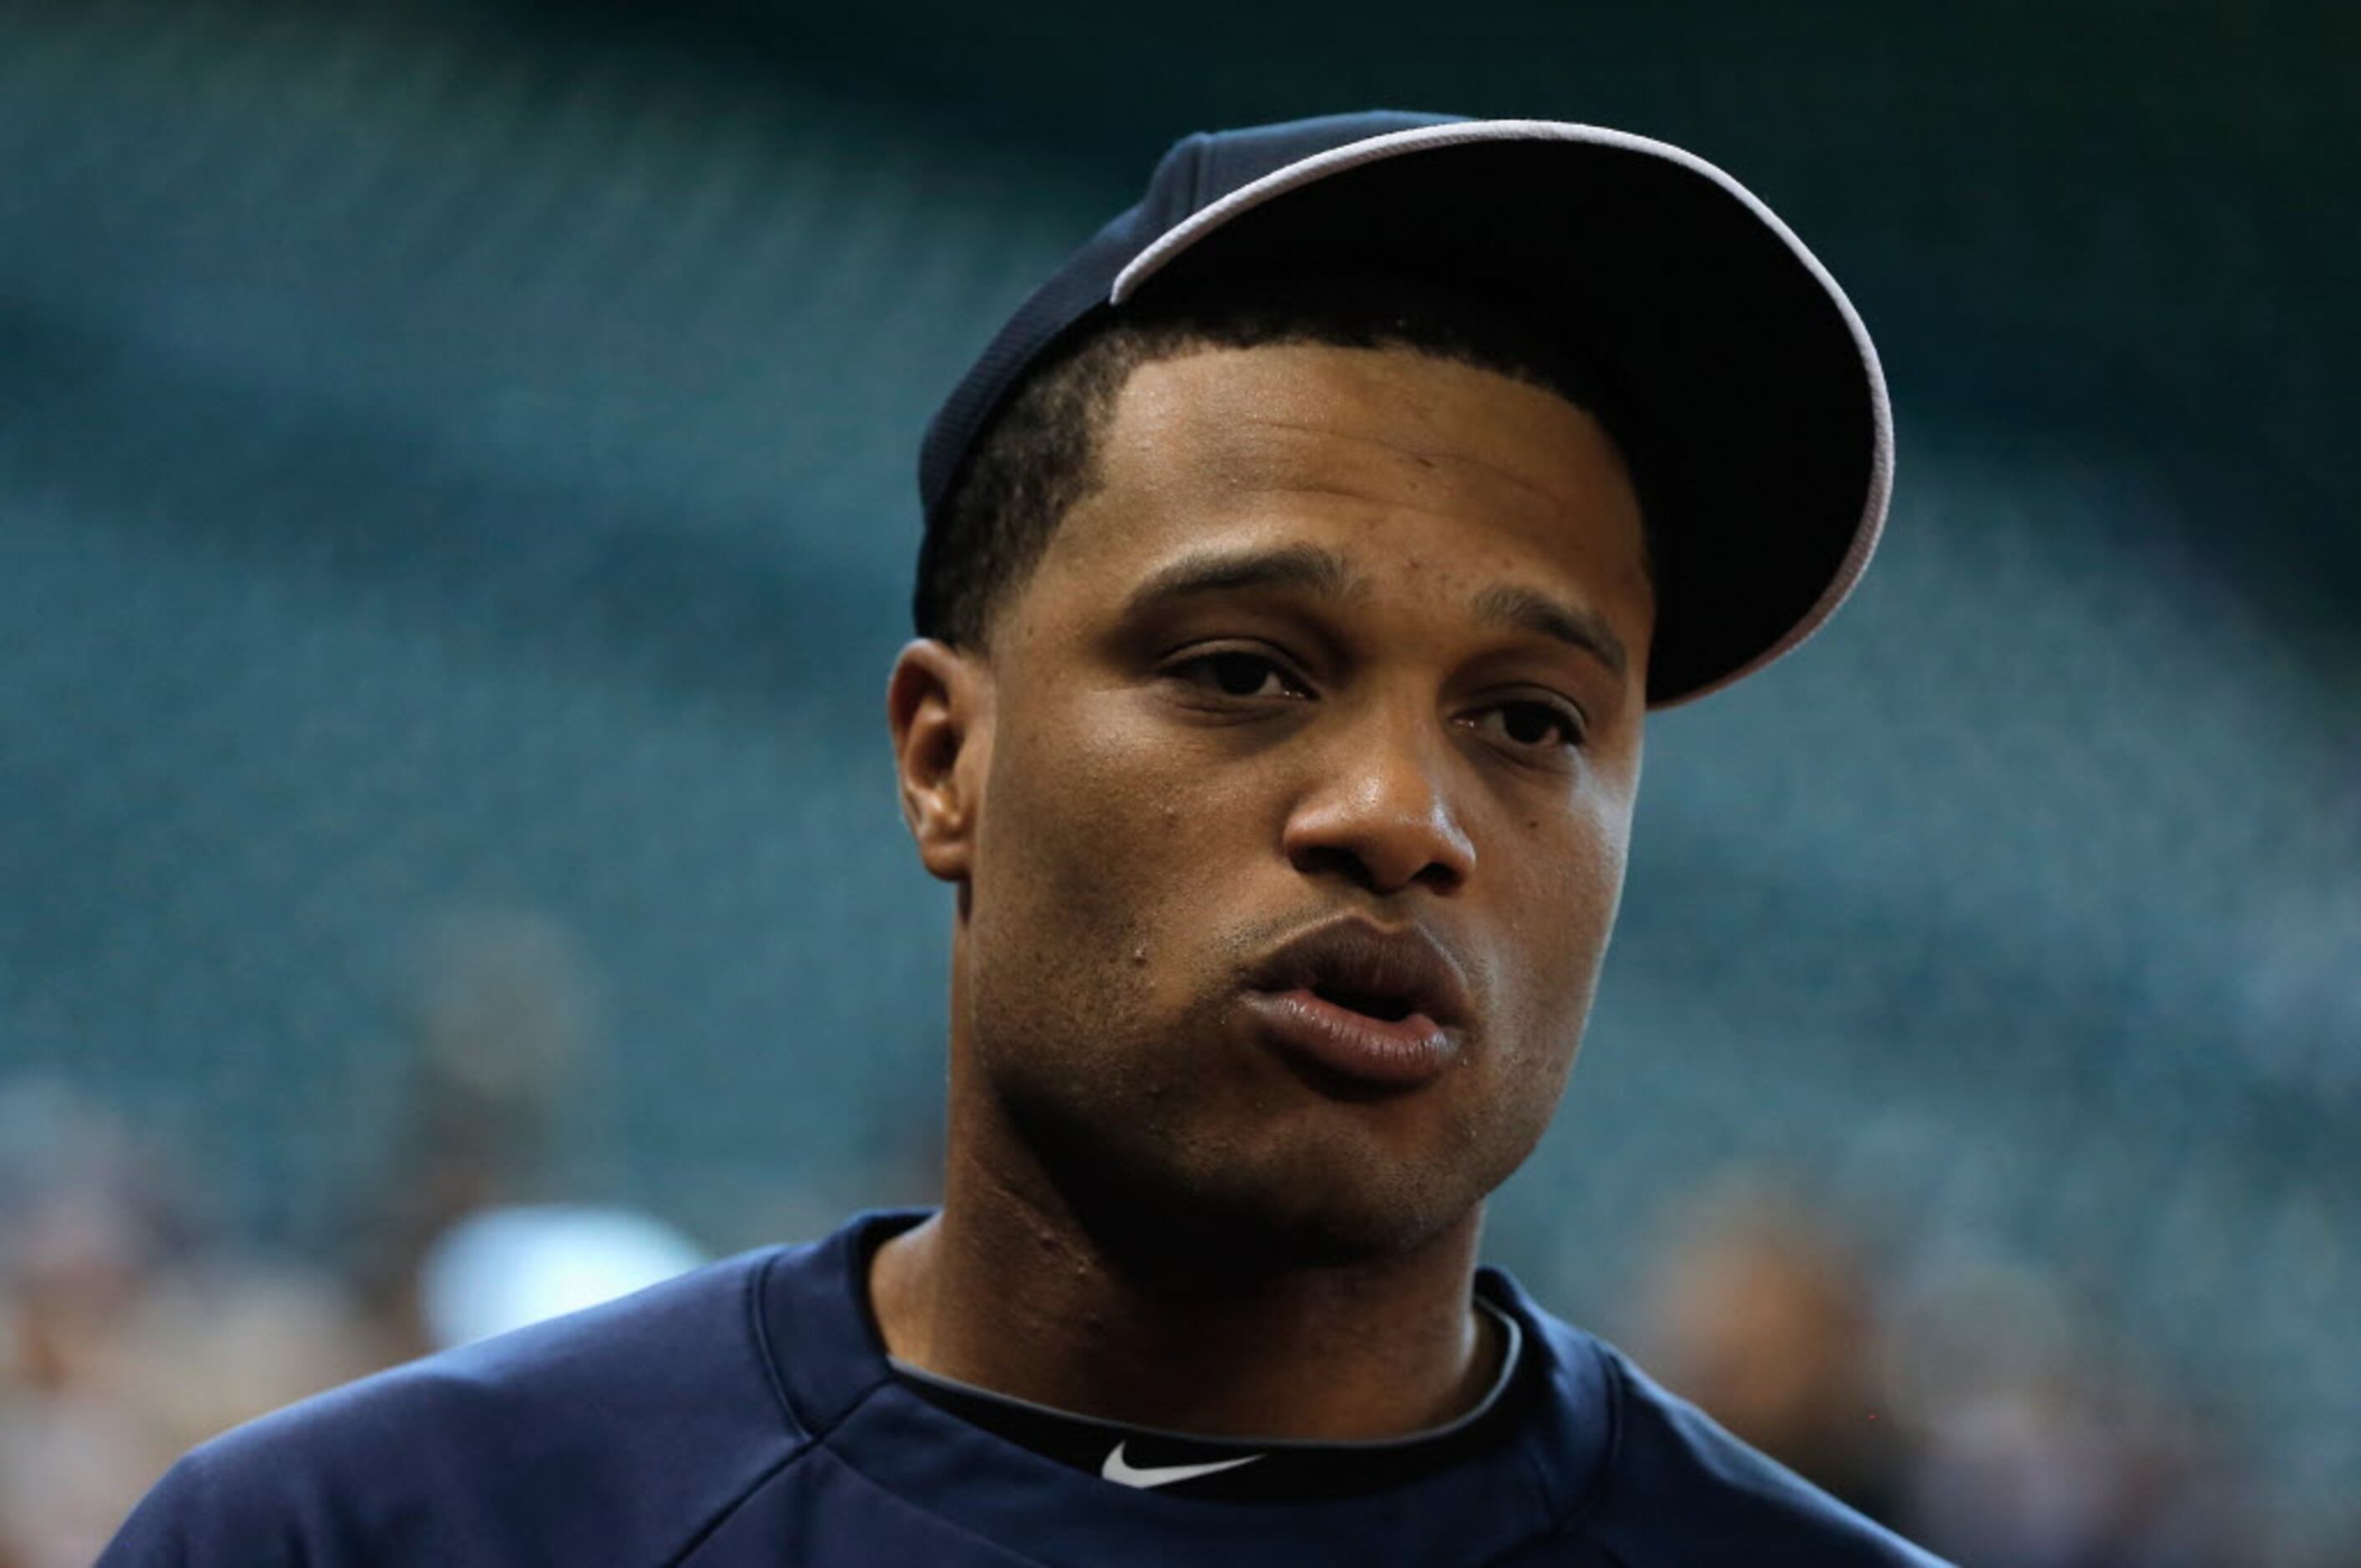 Yankees meet with Robinson Cano's agent; still big gap in contract